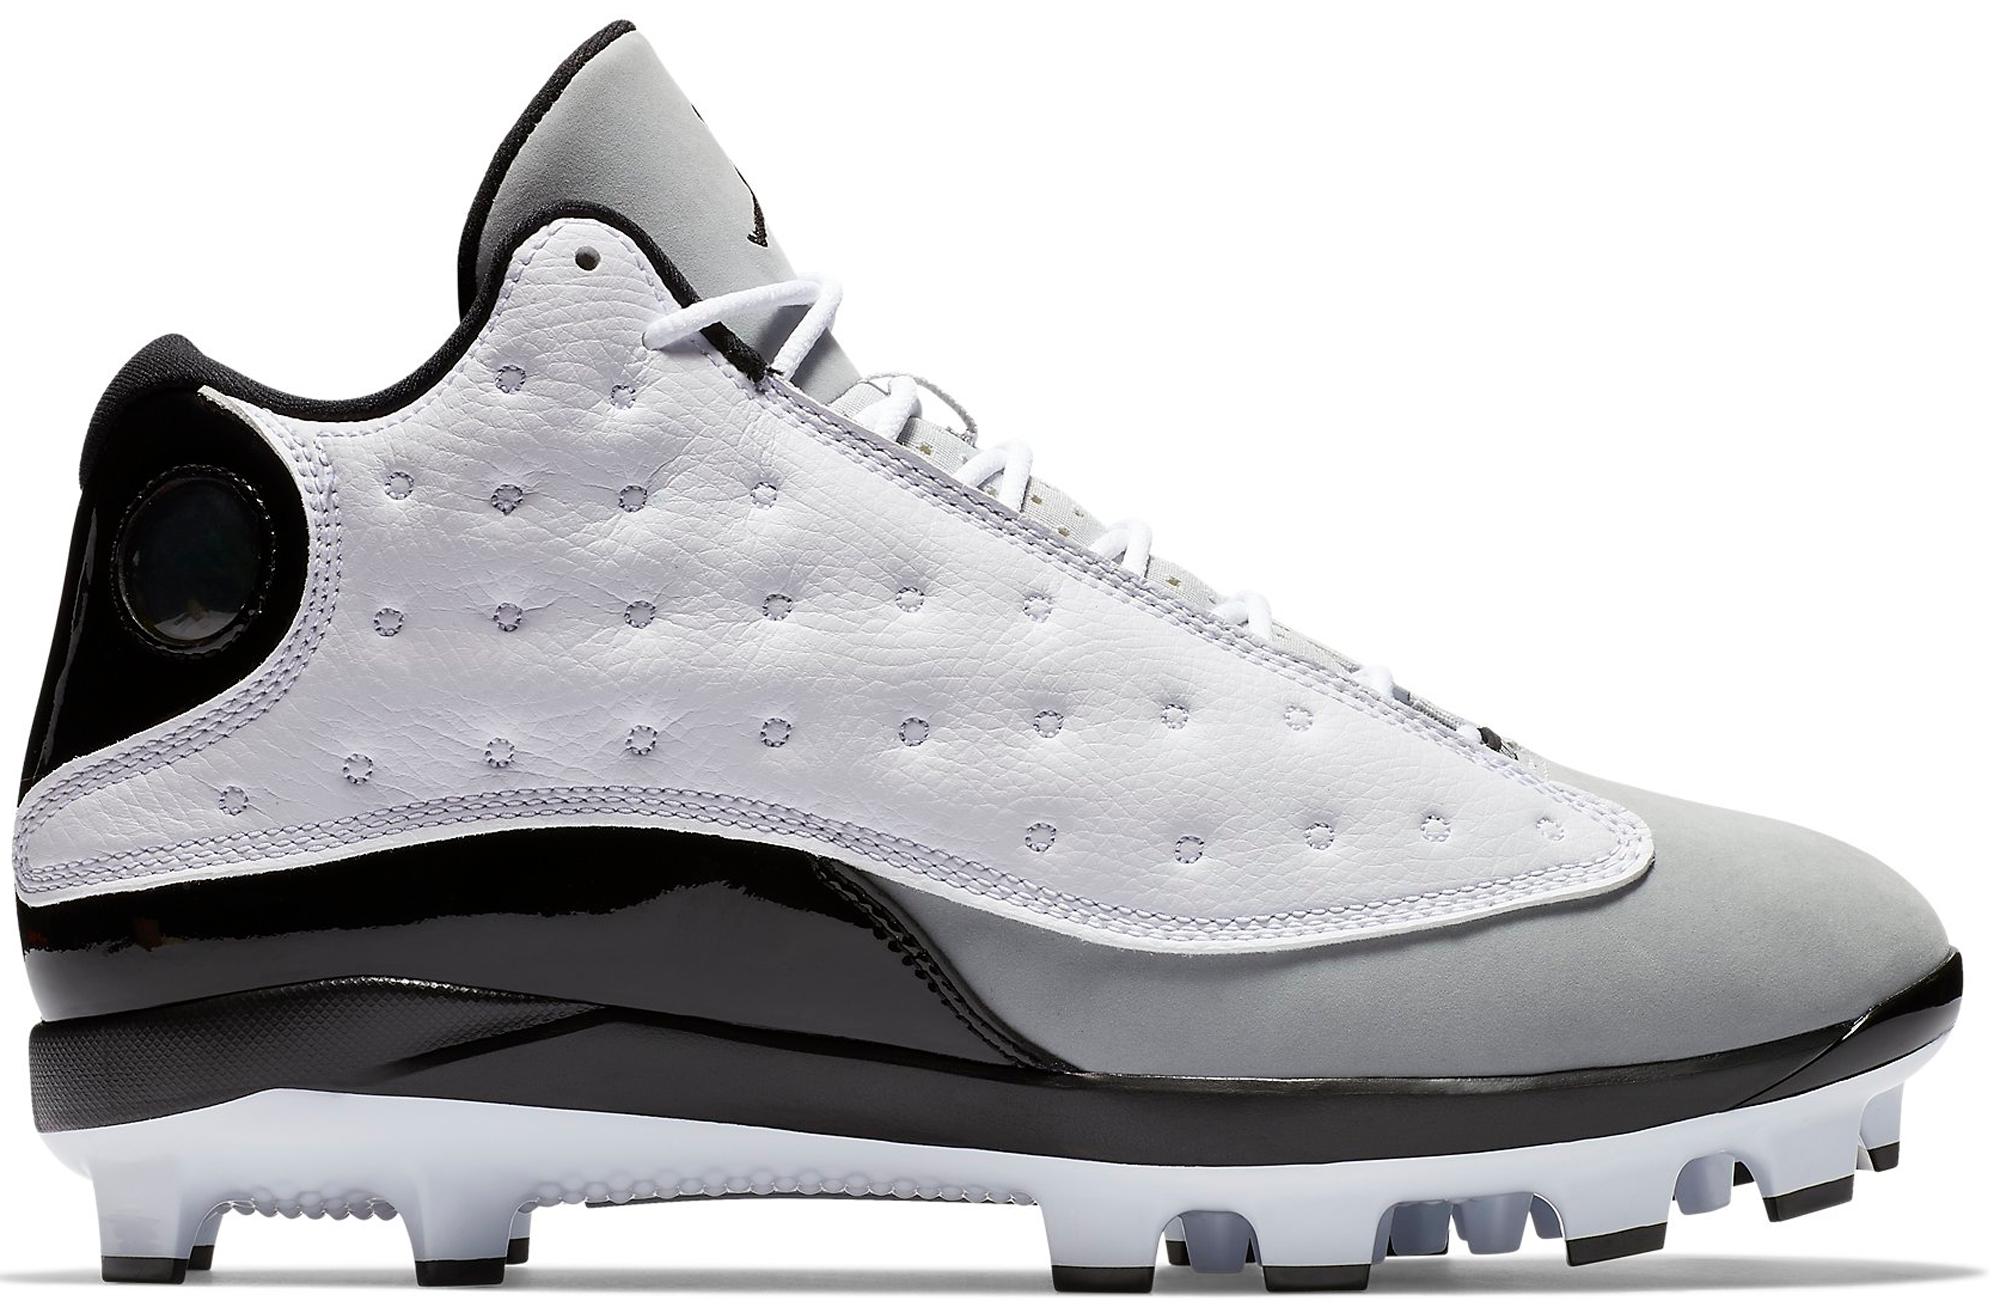 Nike 13 Retro Mcs Cleat Barons in White 